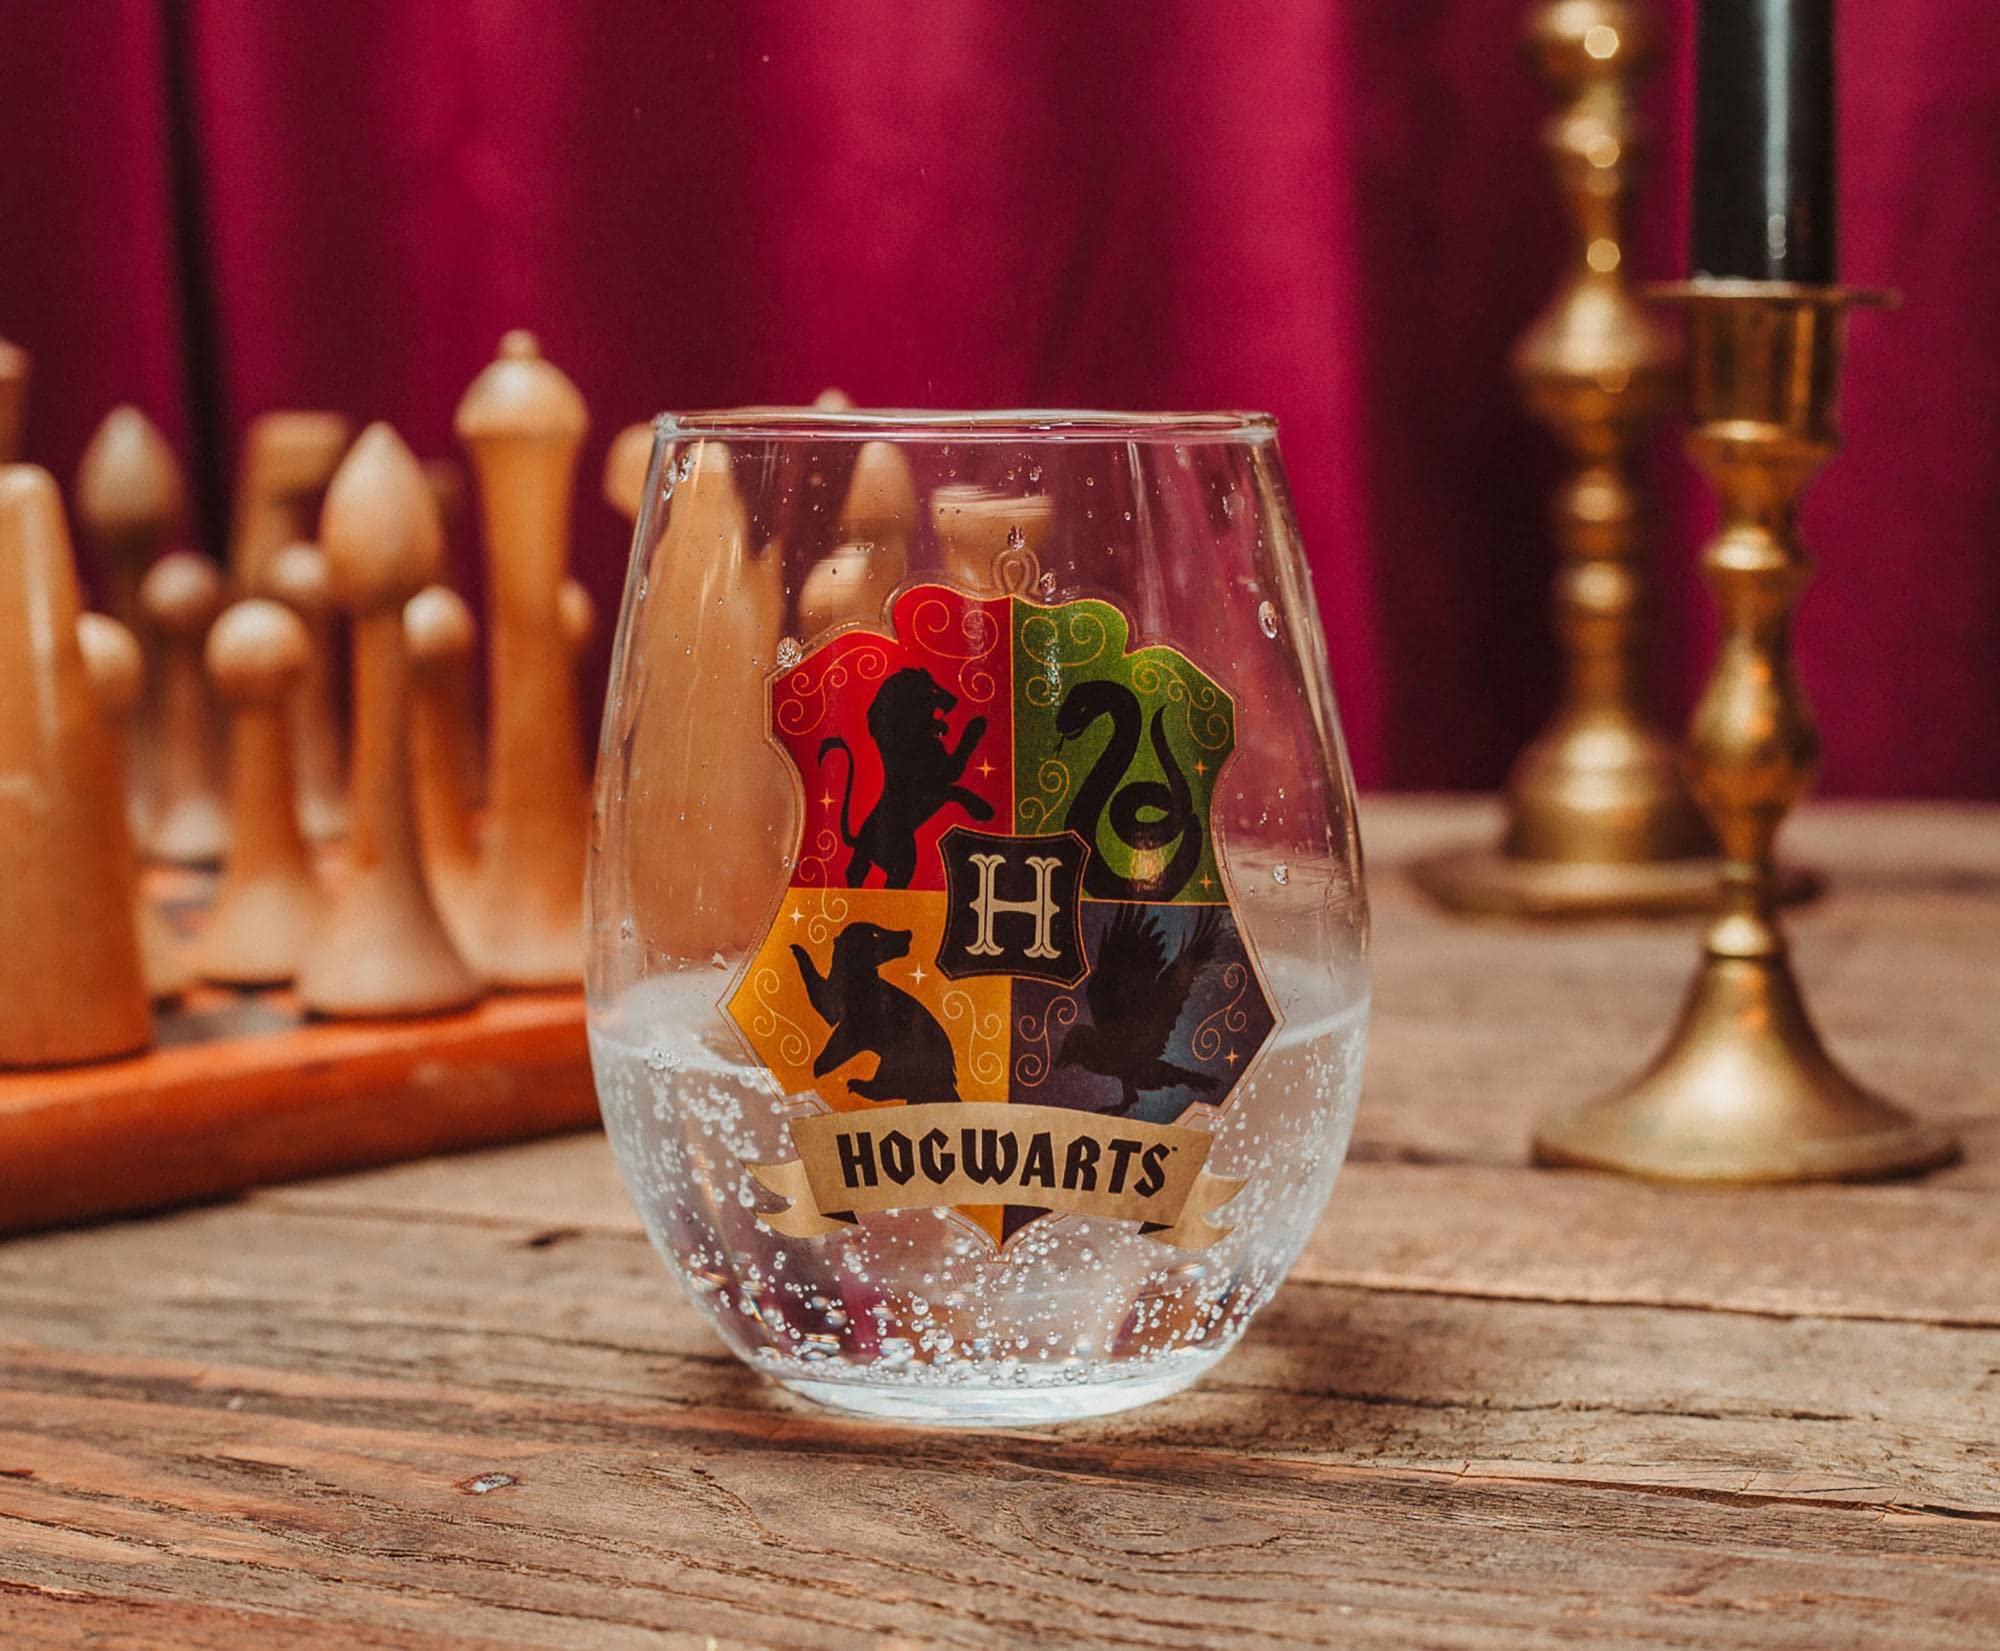 Silver Buffalo Harry Potter Hogwarts Crest 20-Ounce Stemless Wine Glass | Wizarding World Tumbler Cup For Mimosas, Cocktails